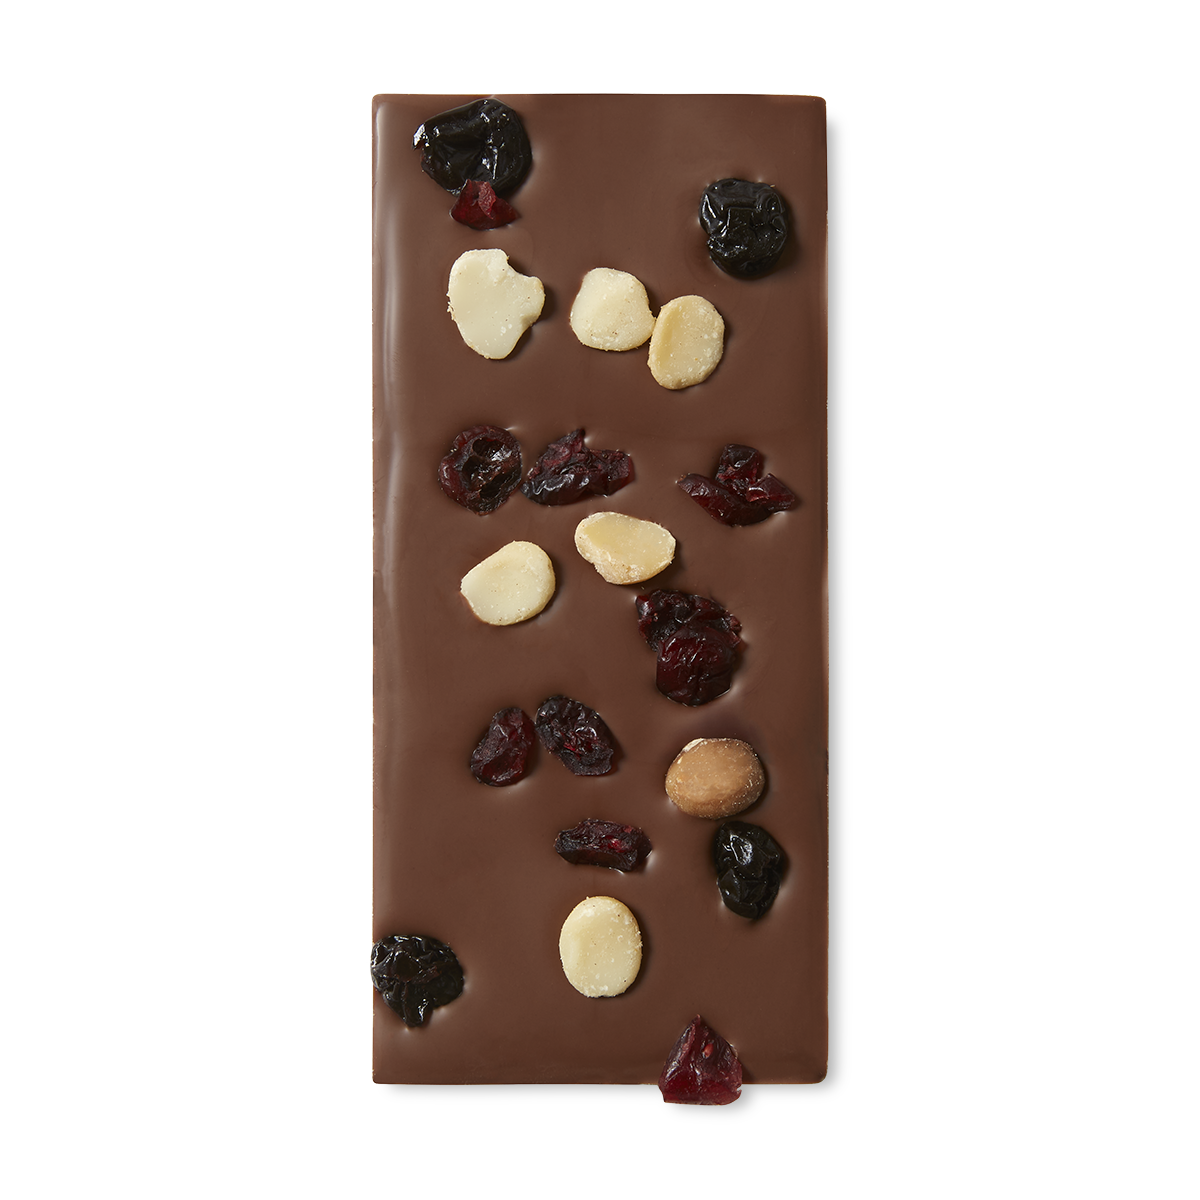 Exposed chocolate block with fruit and nuts